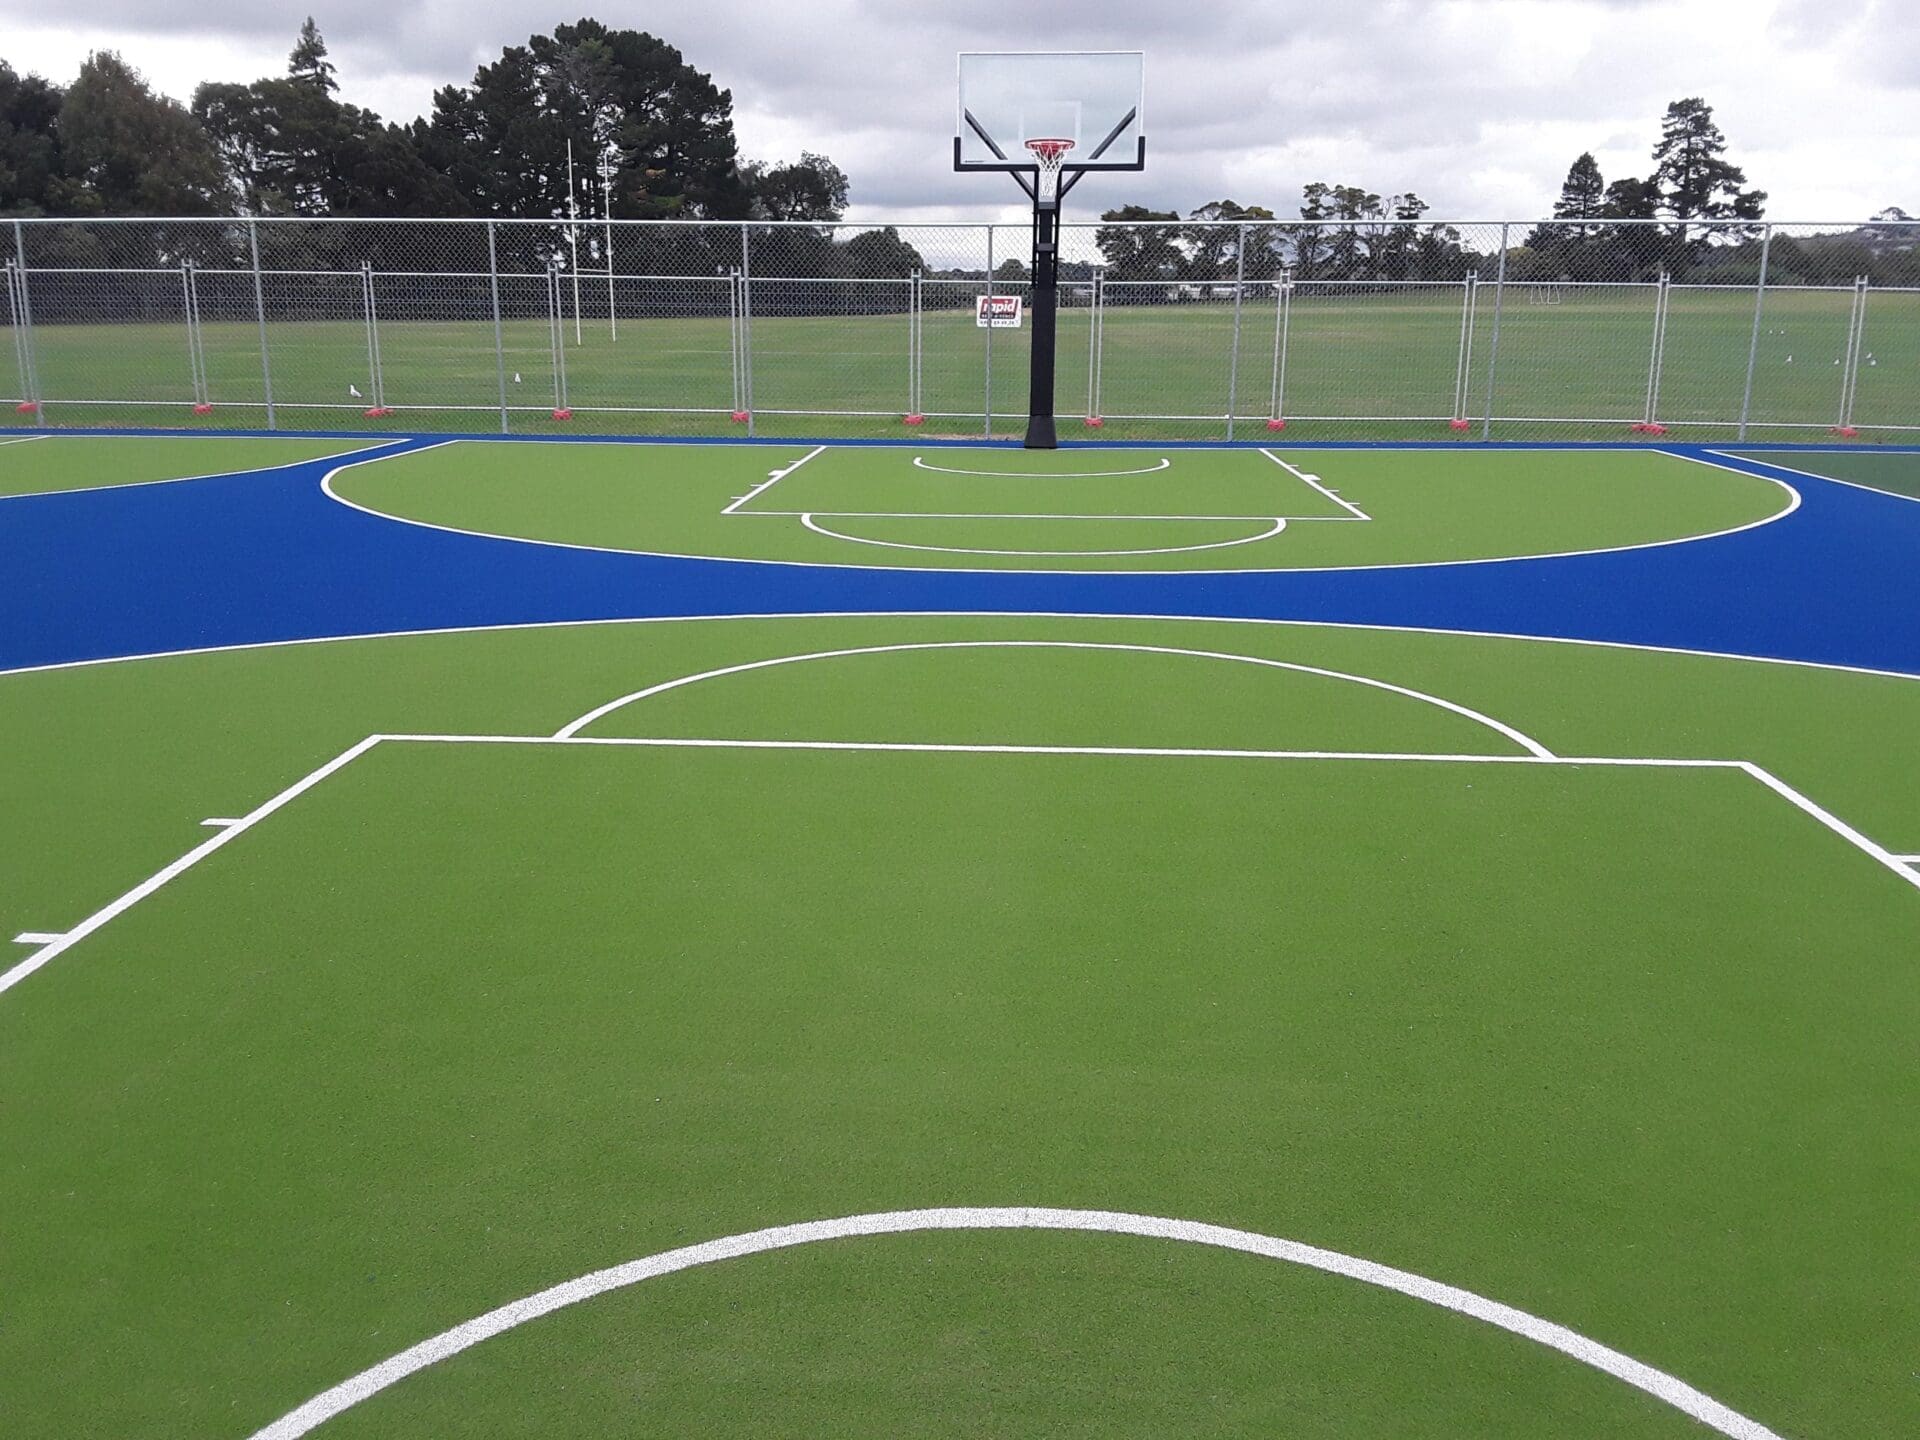 TigerTurf Trophy multi-sports courts